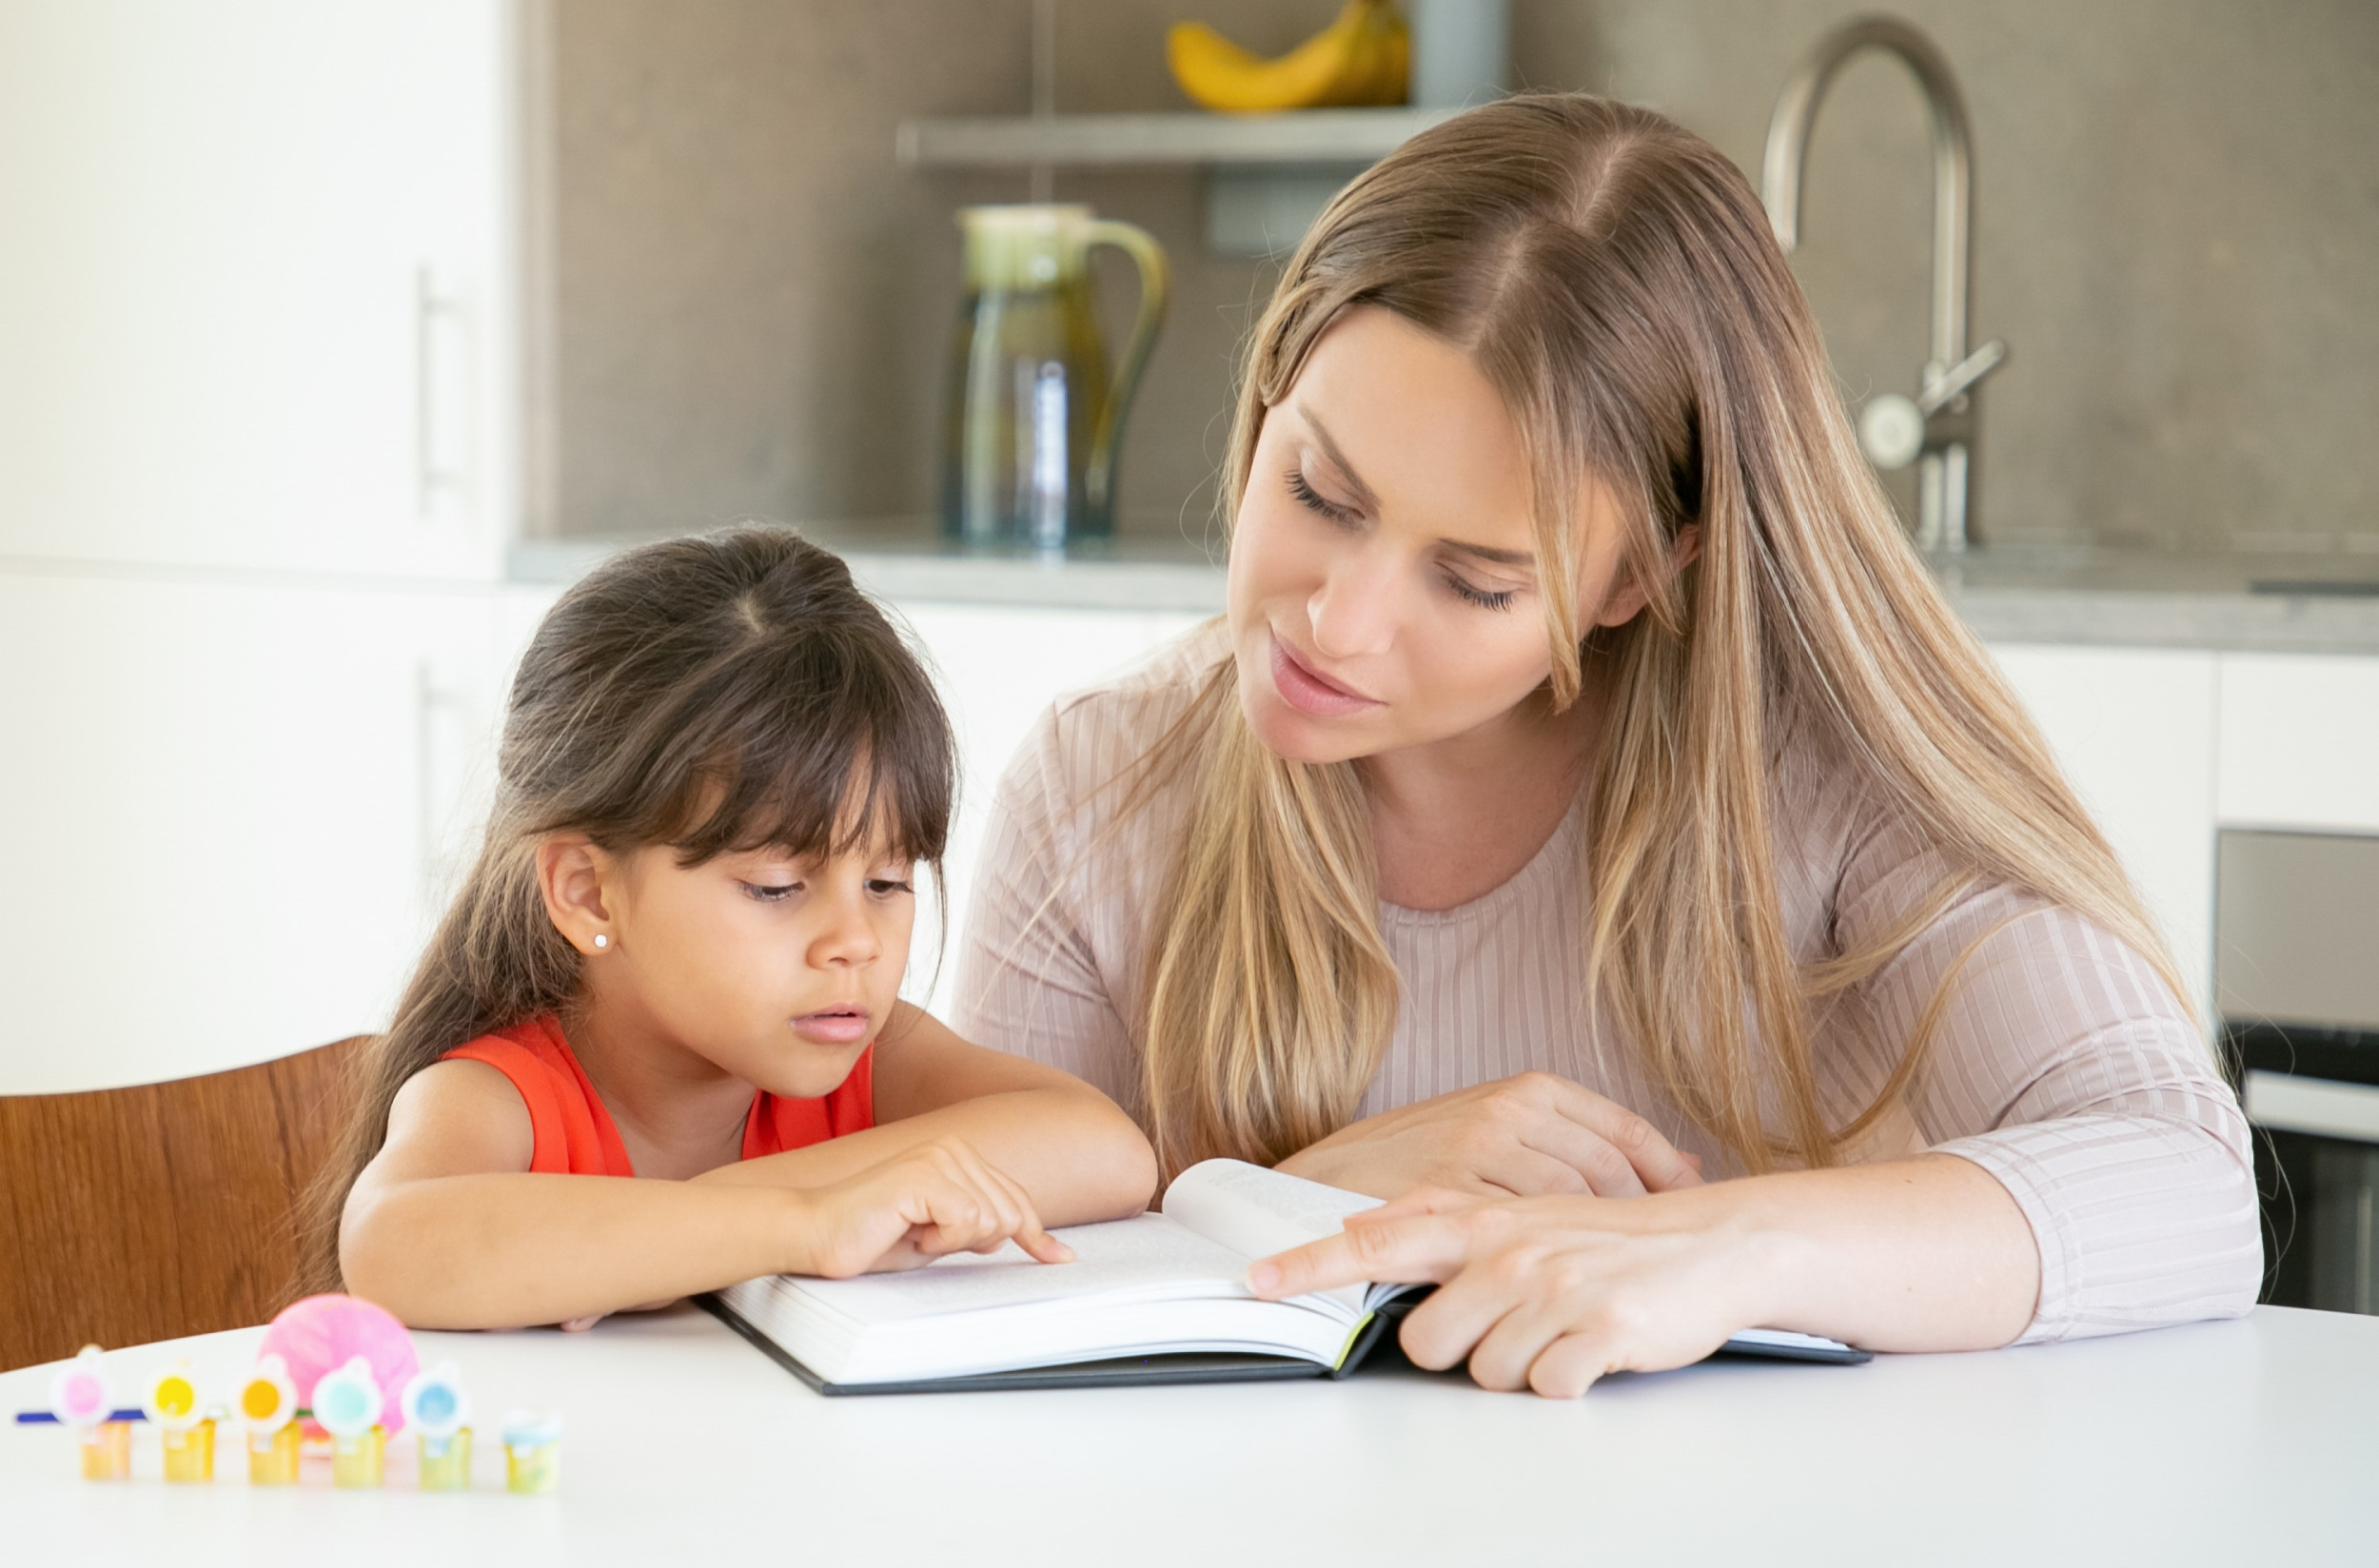 pretty-mom-reading-book-with-daughter-kitchen.jpg